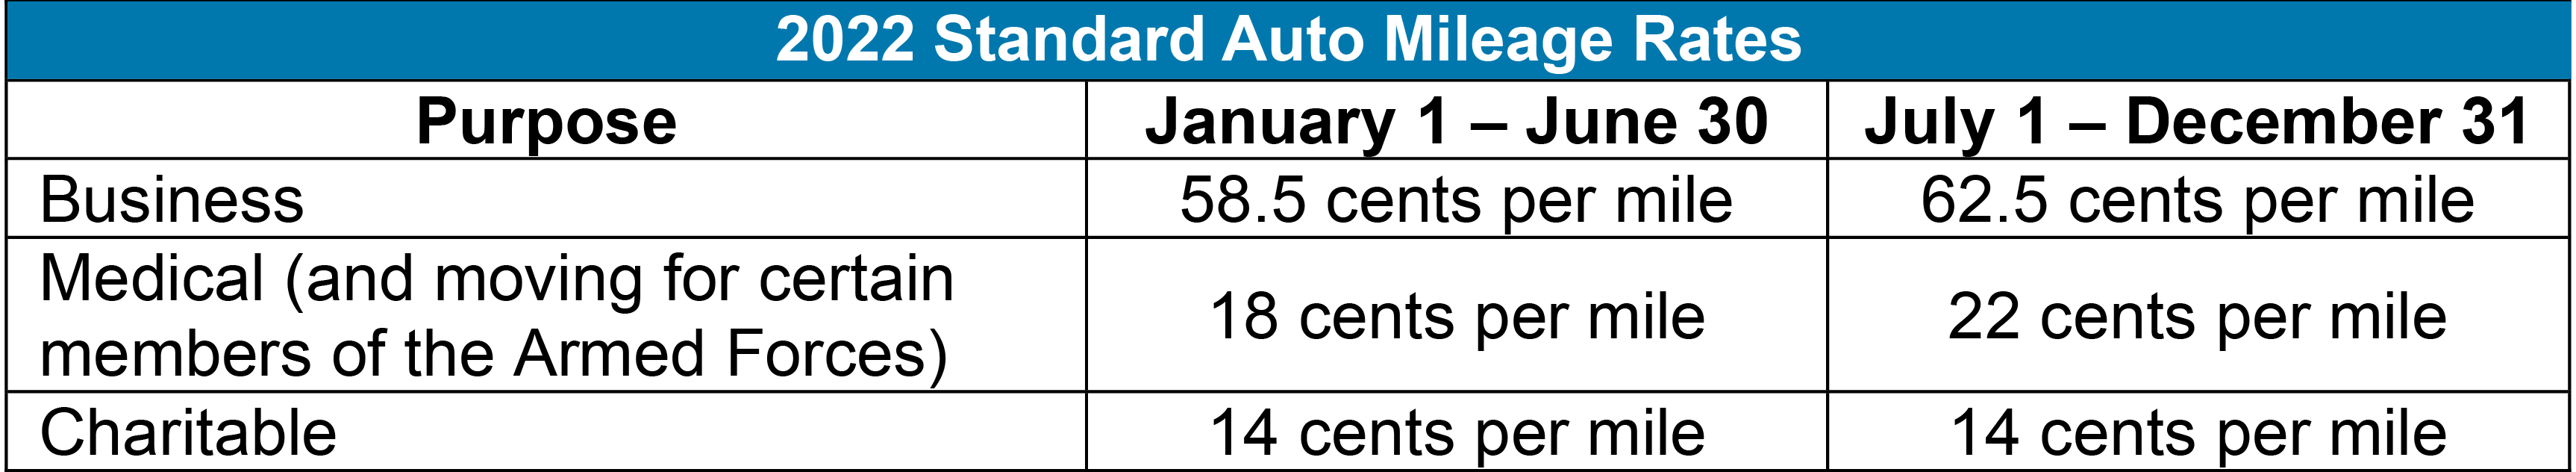 IRS Publishes MidYear Increase to Standard Mileage Rates BMWL